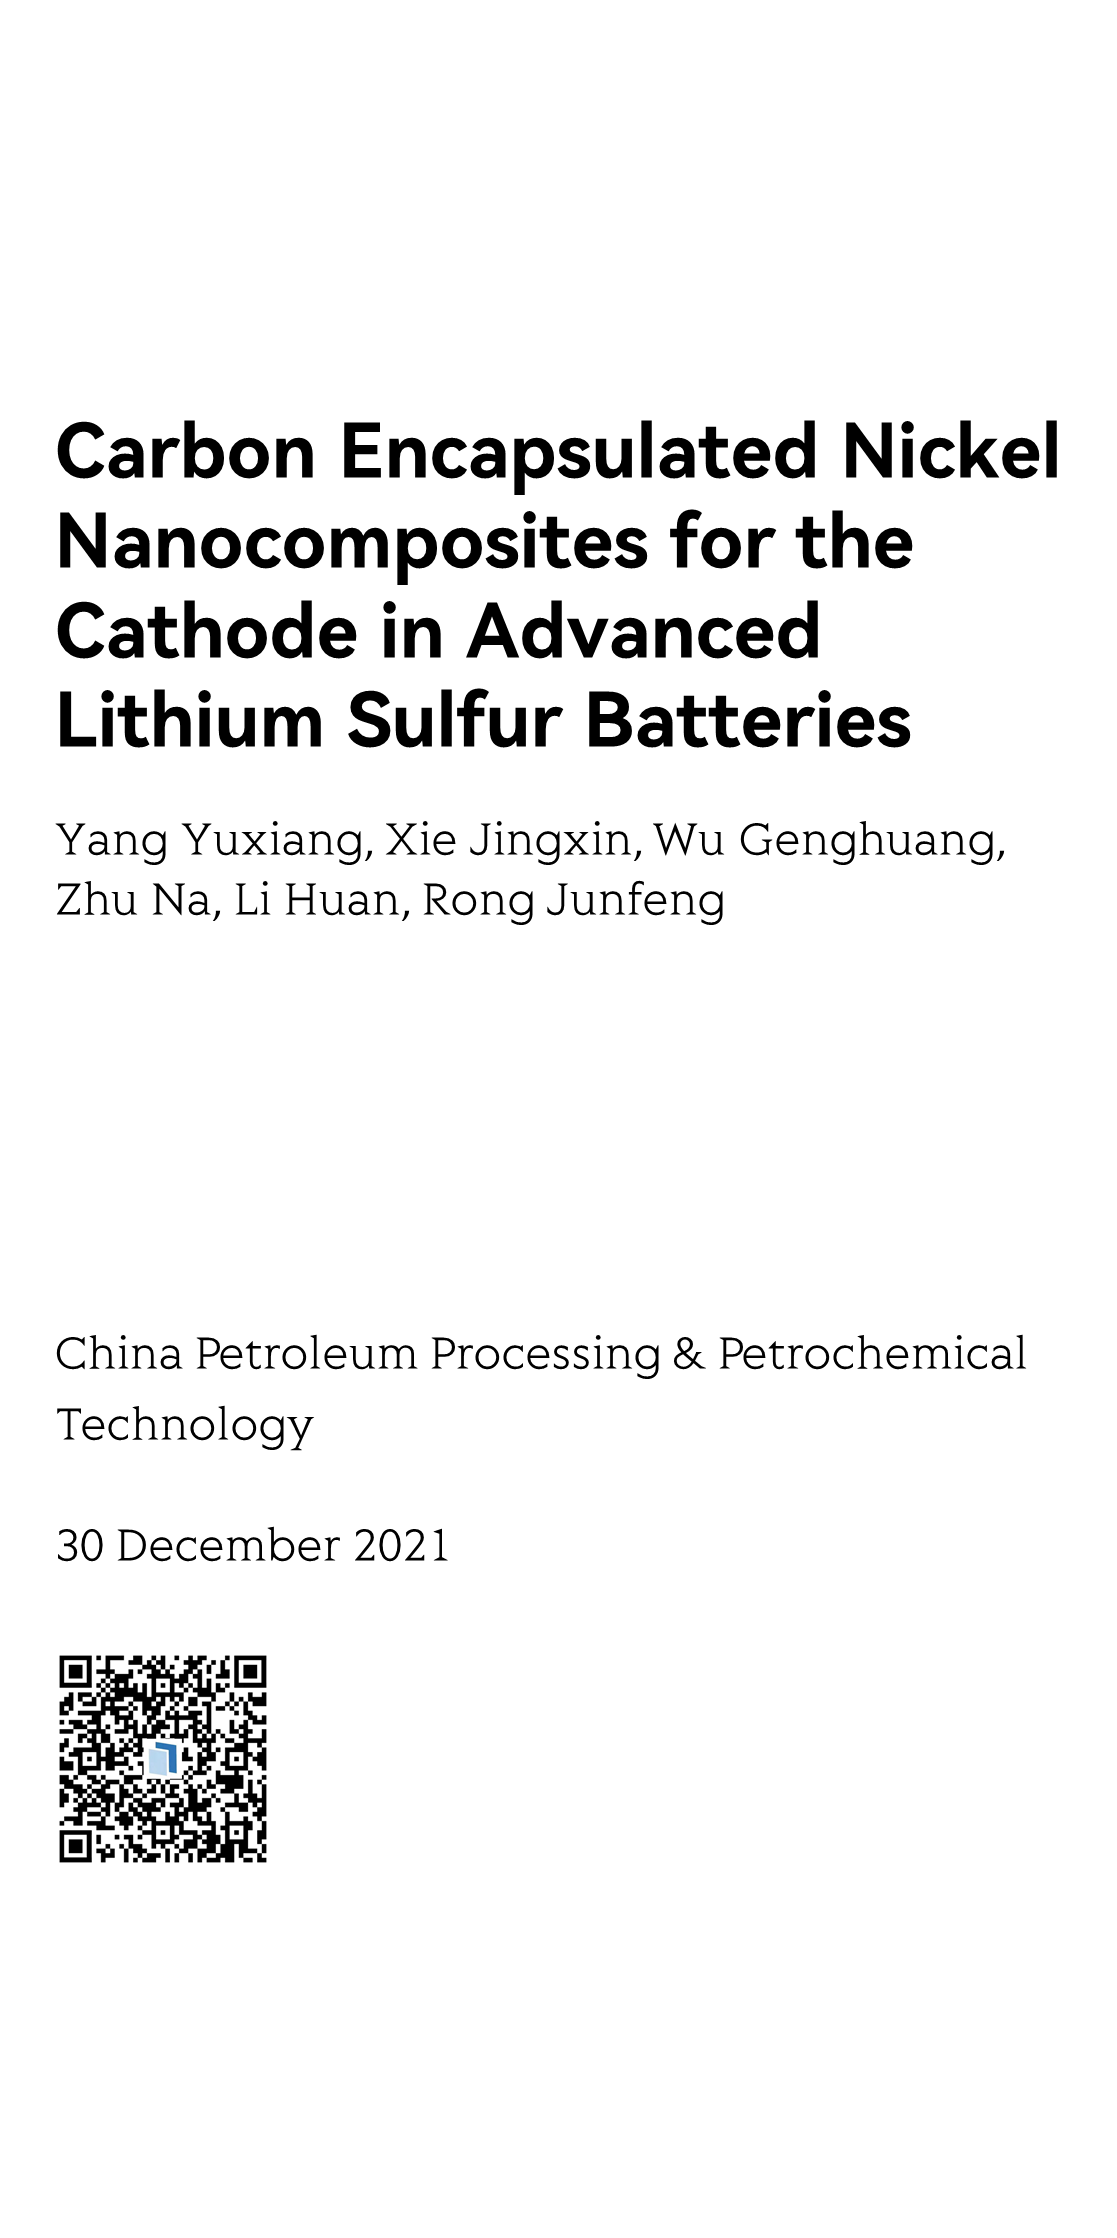 Carbon Encapsulated Nickel Nanocomposites for the Cathode in Advanced Lithium Sulfur Batteries_1